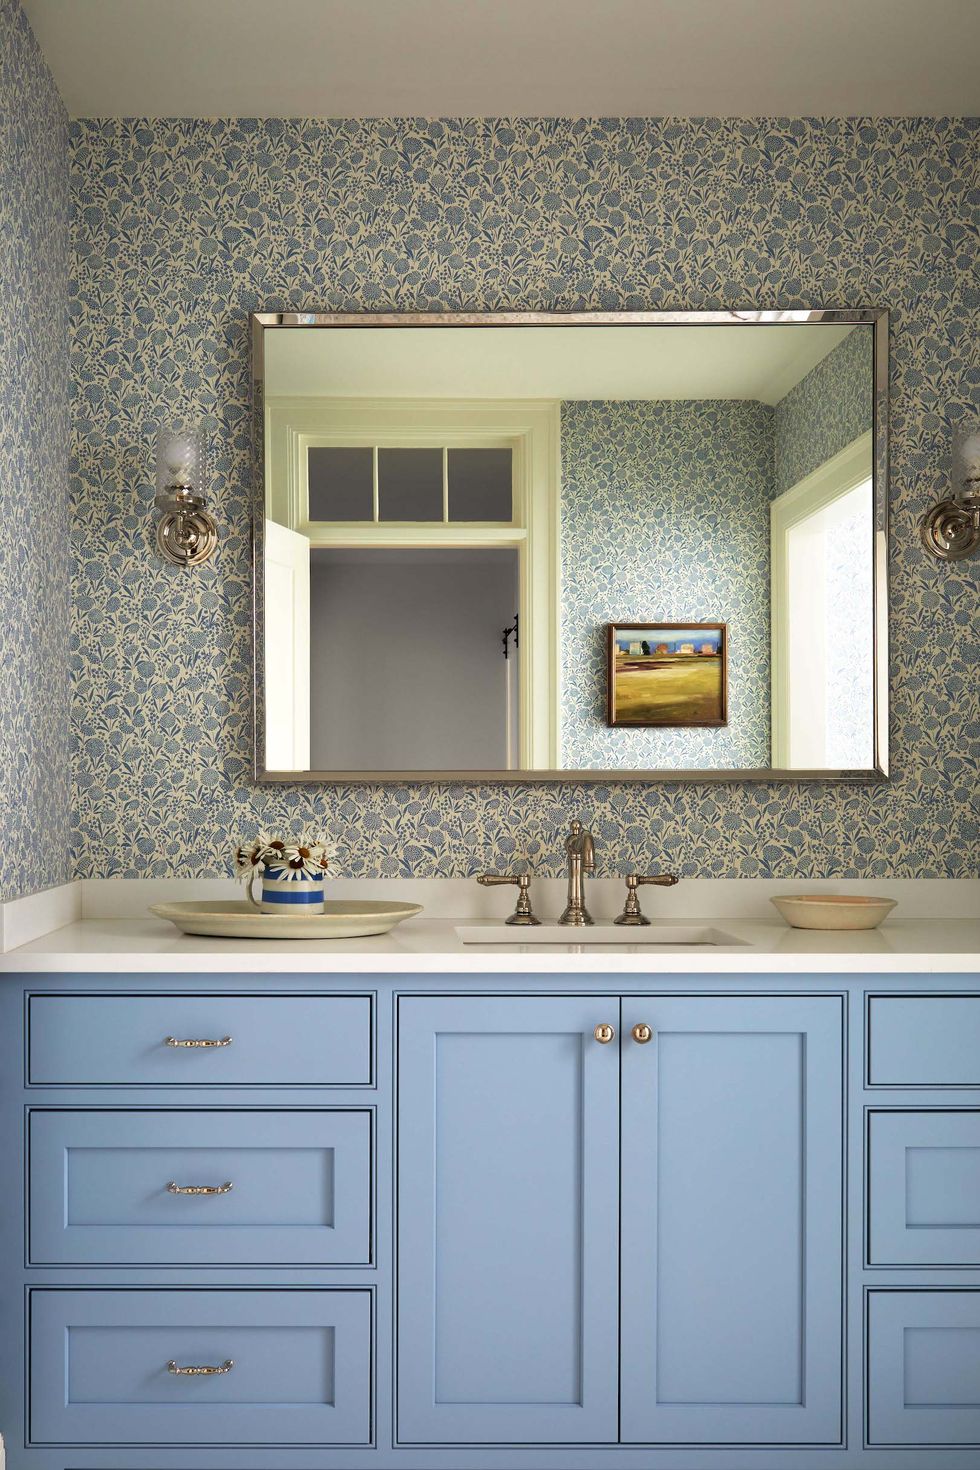 10 Beautiful Bathroom Paint Colors for Your Next Renovation